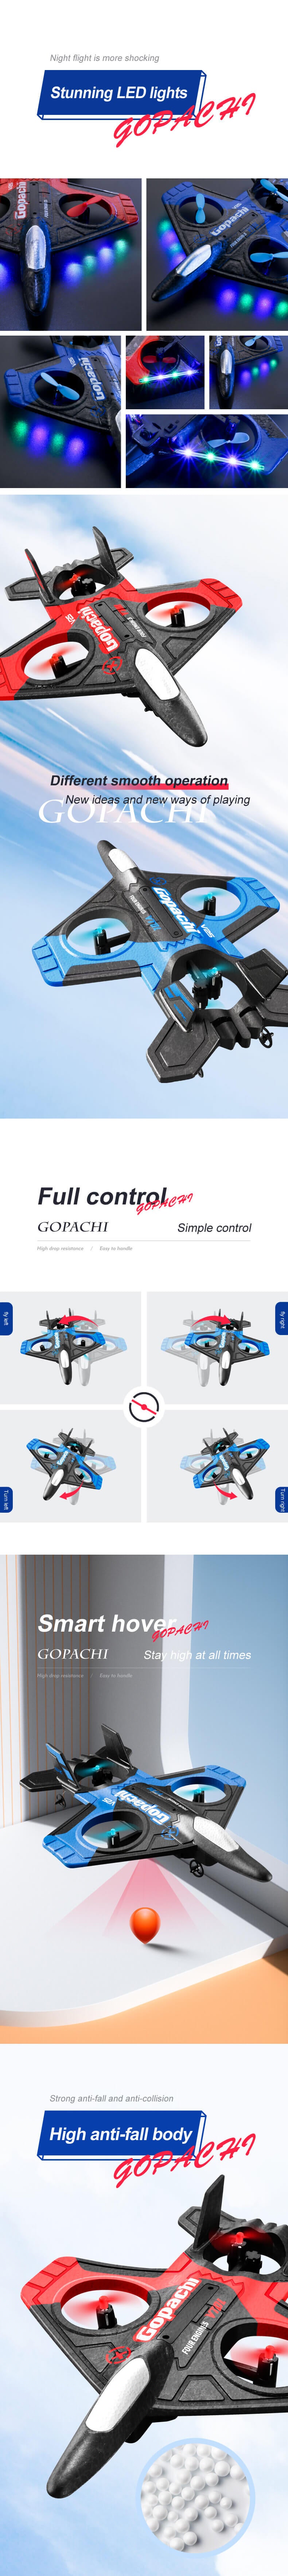 4DRC V25 RC aircraft Wifi with 720P camera 2.4G wireless remote control Model aeroplane toy children's gift